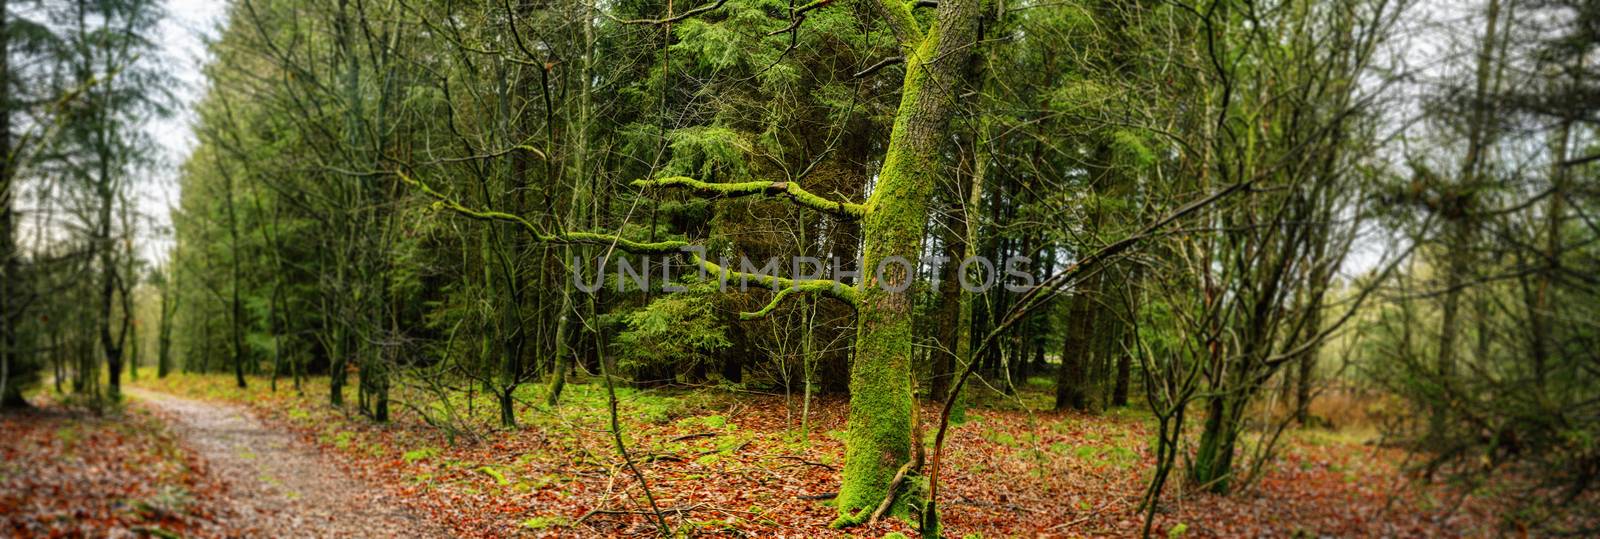 Forest panorama scenery with a tree by Sportactive